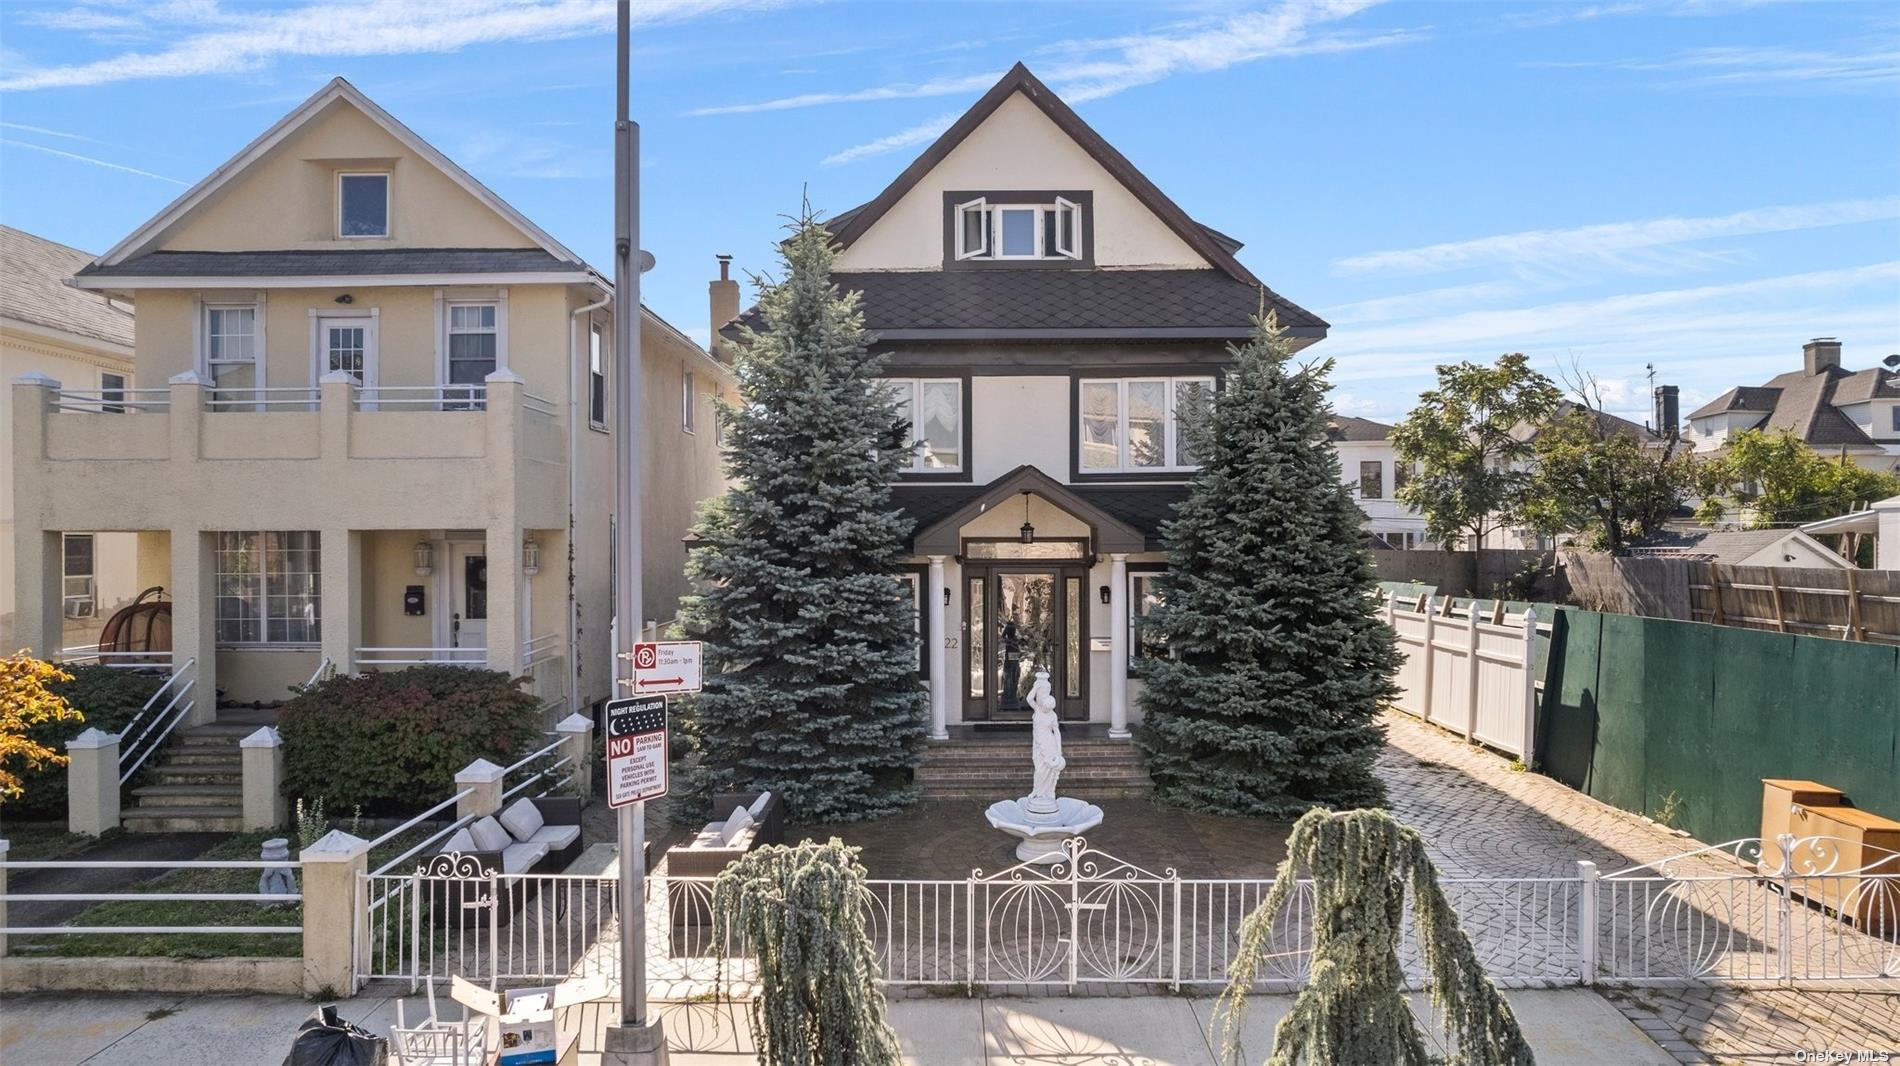 Two Family in Sea Gate - Cypress  Brooklyn, NY 11224